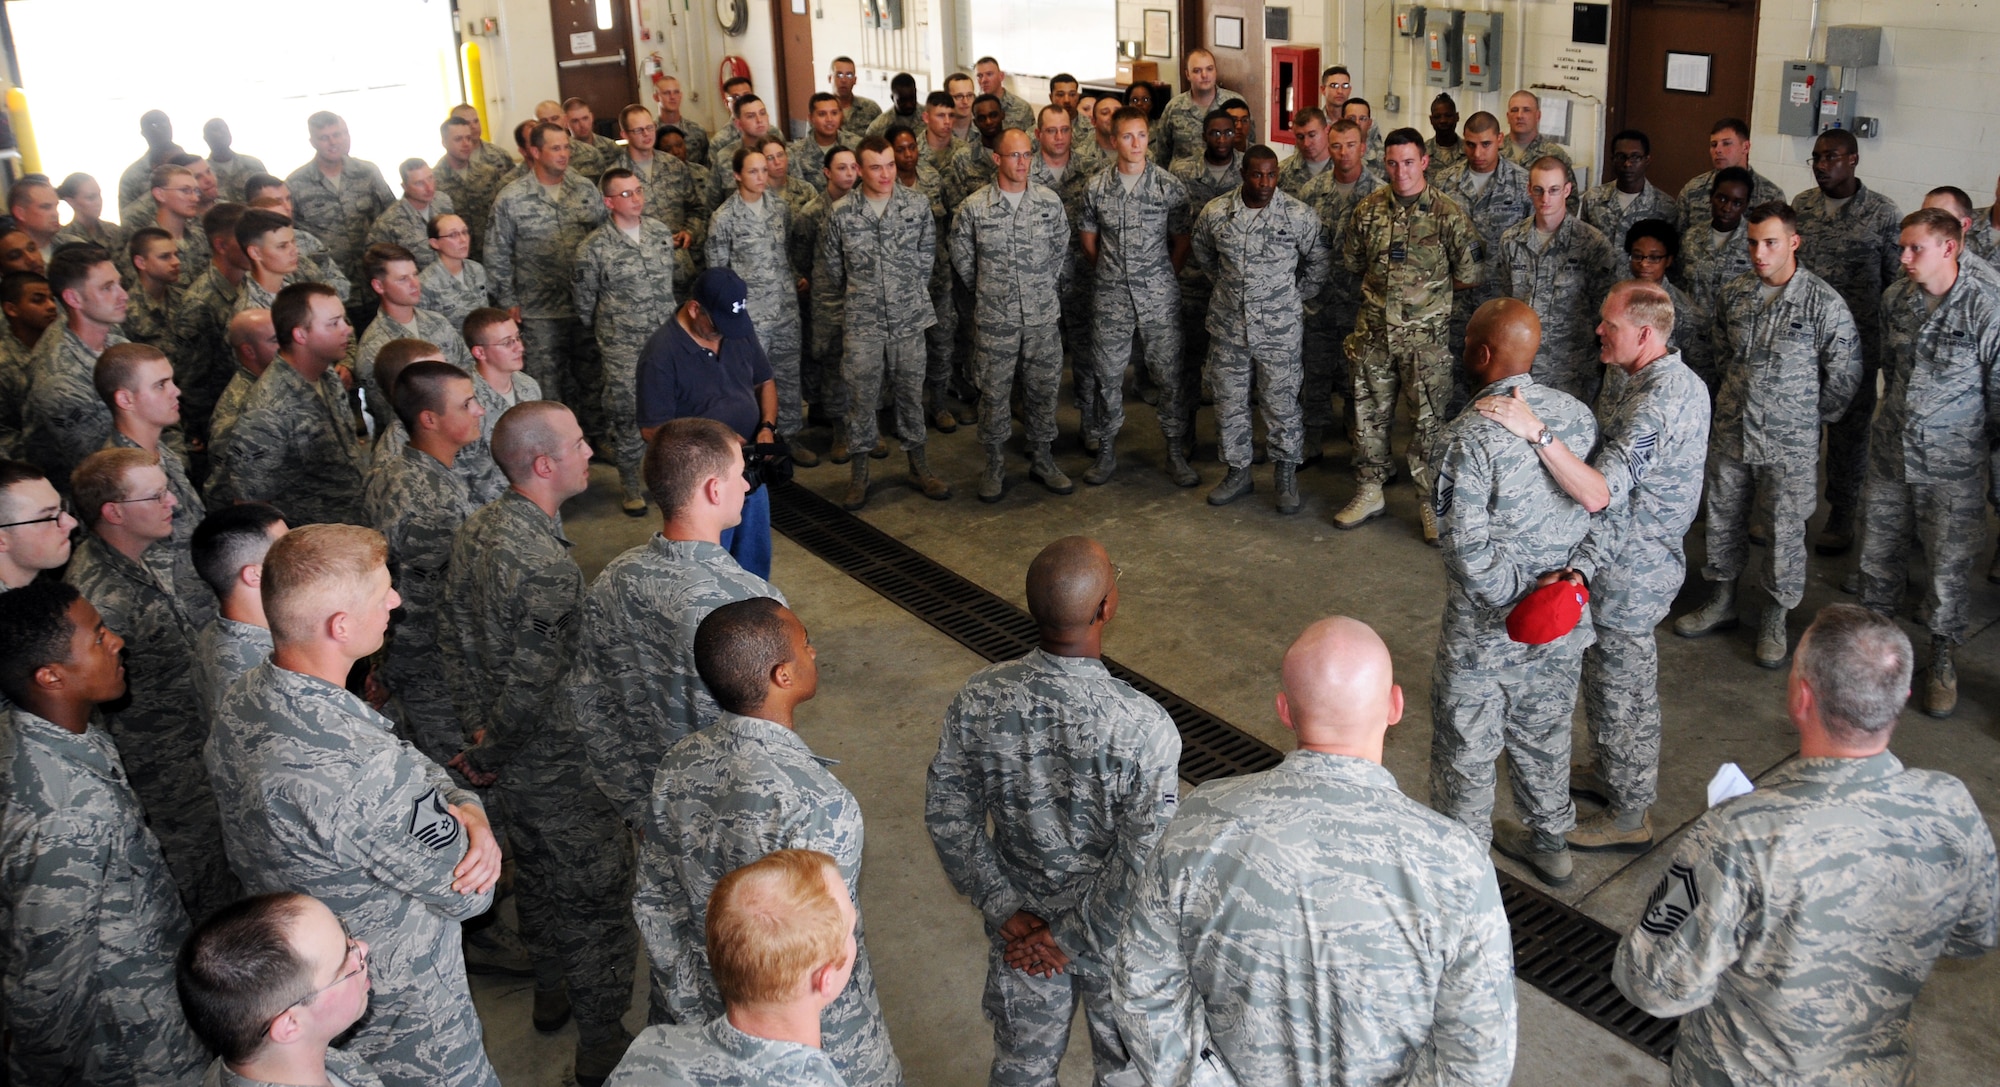 Chief Master Sgt. of the Air Force James A. Cody introduces Master Sgt. Andre Davis to a group of Airmen assigned to the 5th Combat Communications Group, June 25, 2014, during his visit to Robins Air Force Base, Ga. Davis, with the Air National Guard’s 203rd RED HORSE Squadron, was one of the Air Force’s 12 Outstanding Airmen of the Year for 2013 and accompanied Cody during his tour of Robins AFB. (U.S. Air Force photo/Senior Master Sgt. Jill LaVoie)